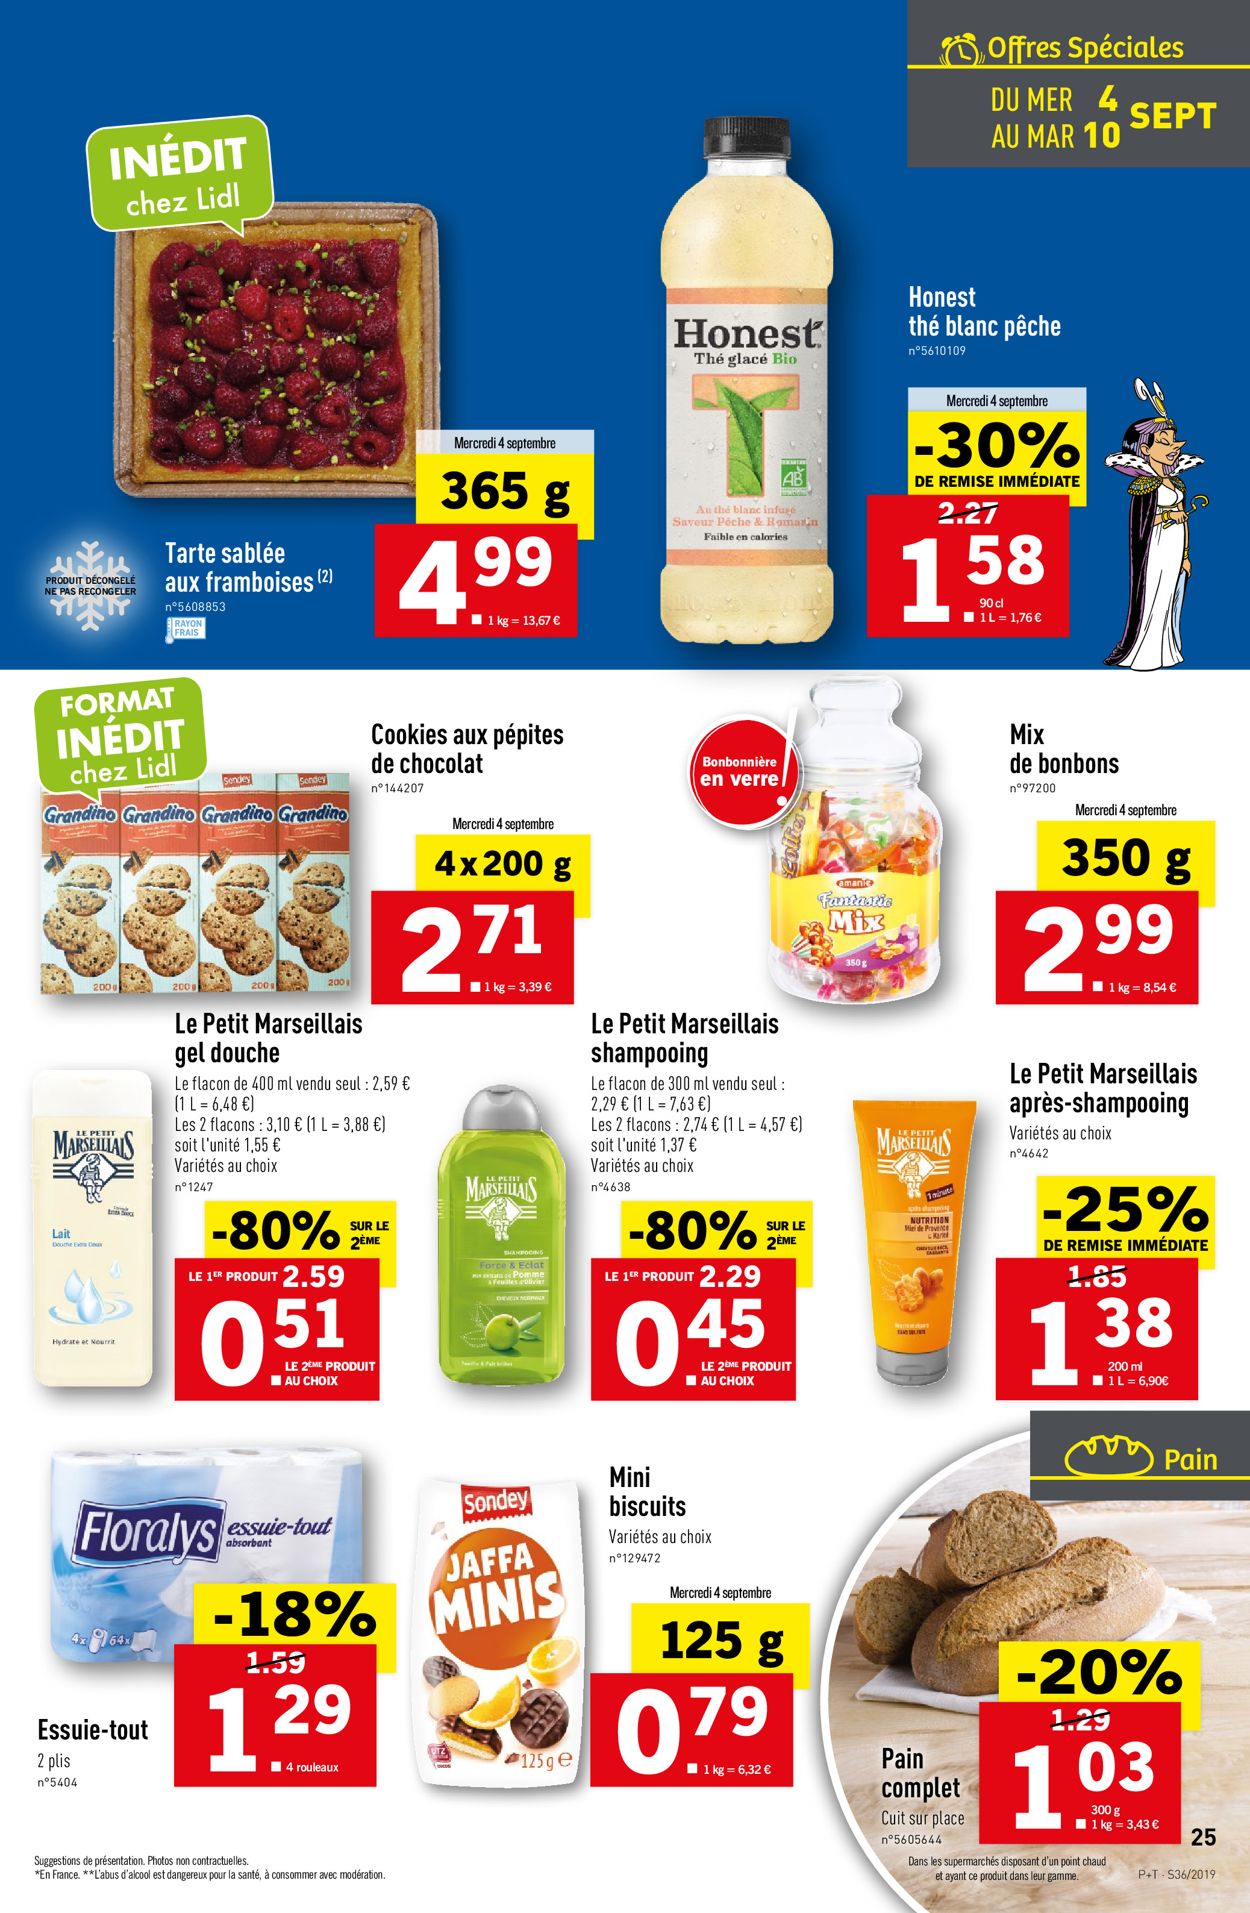 Lidl Catalogue - 04.09-10.09.2019 (Page 25)